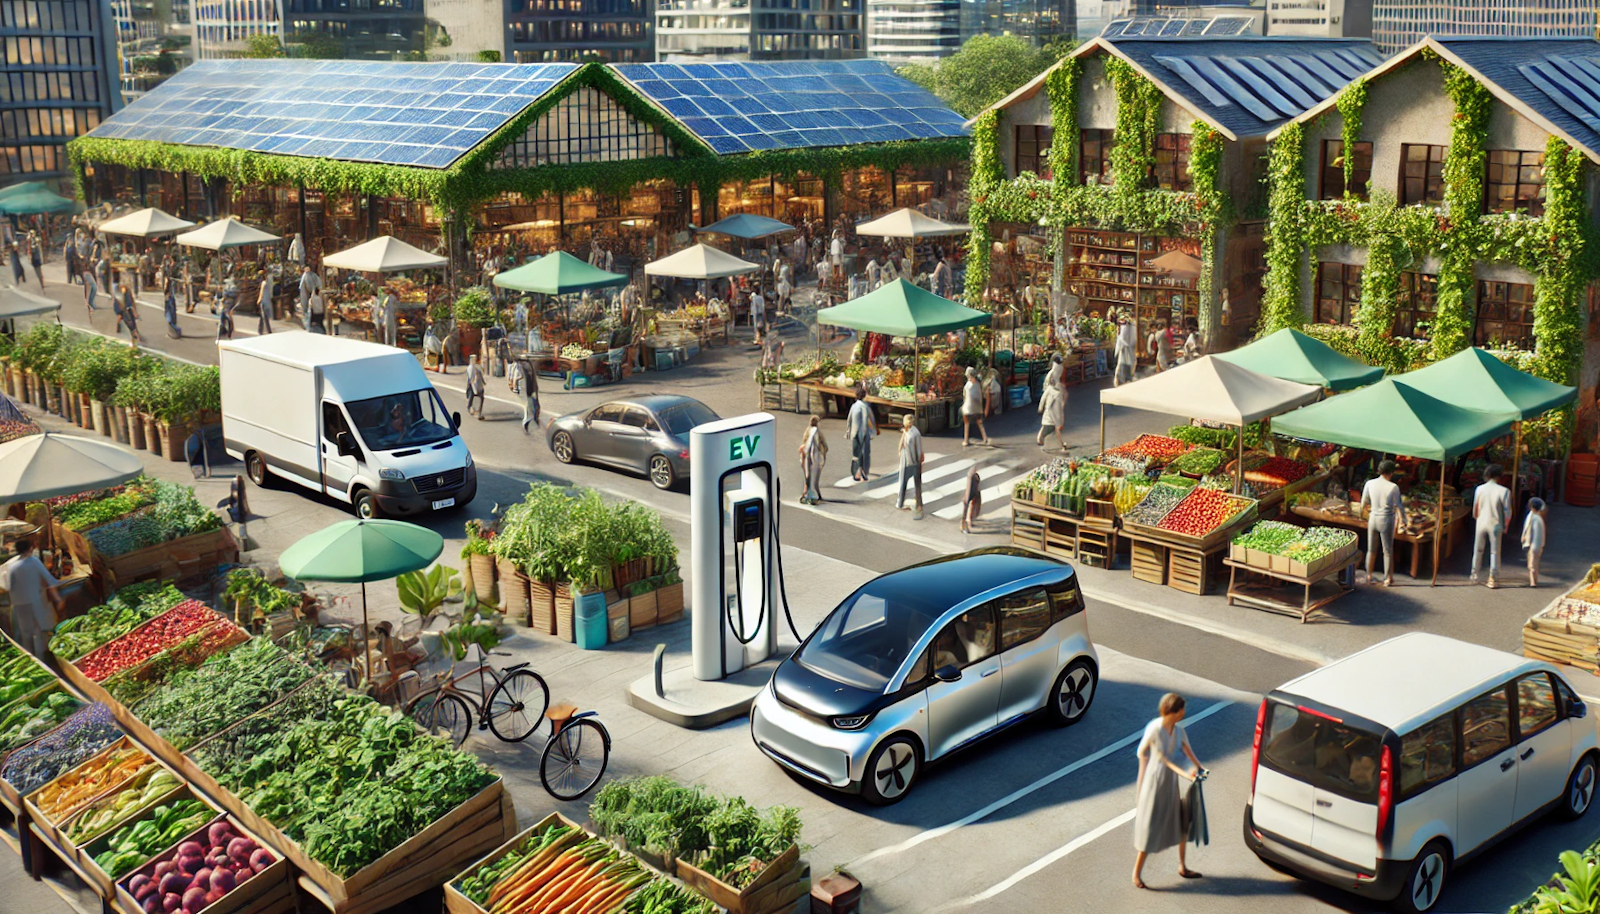 Vibrant sustainable city marketplace with an EV charging station among stalls selling organic goods, showcasing community commitment to green living.